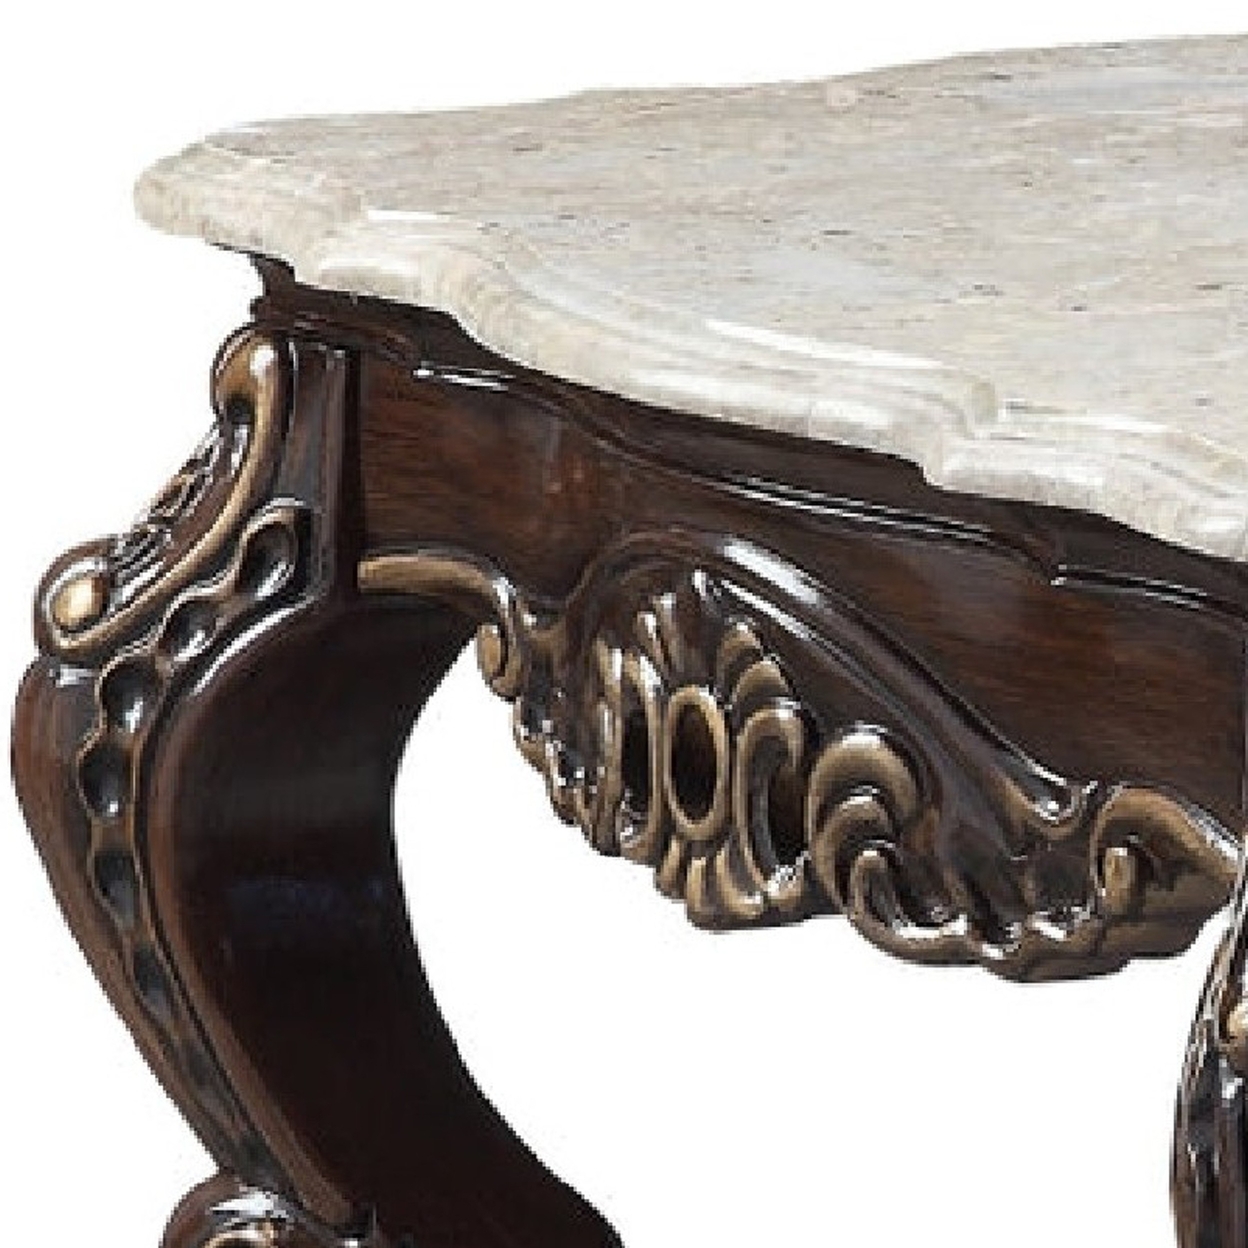 Ben 28 Inch Marble End Table, Scrolled Details, Cabriole Legs, Brown- Saltoro Sherpi